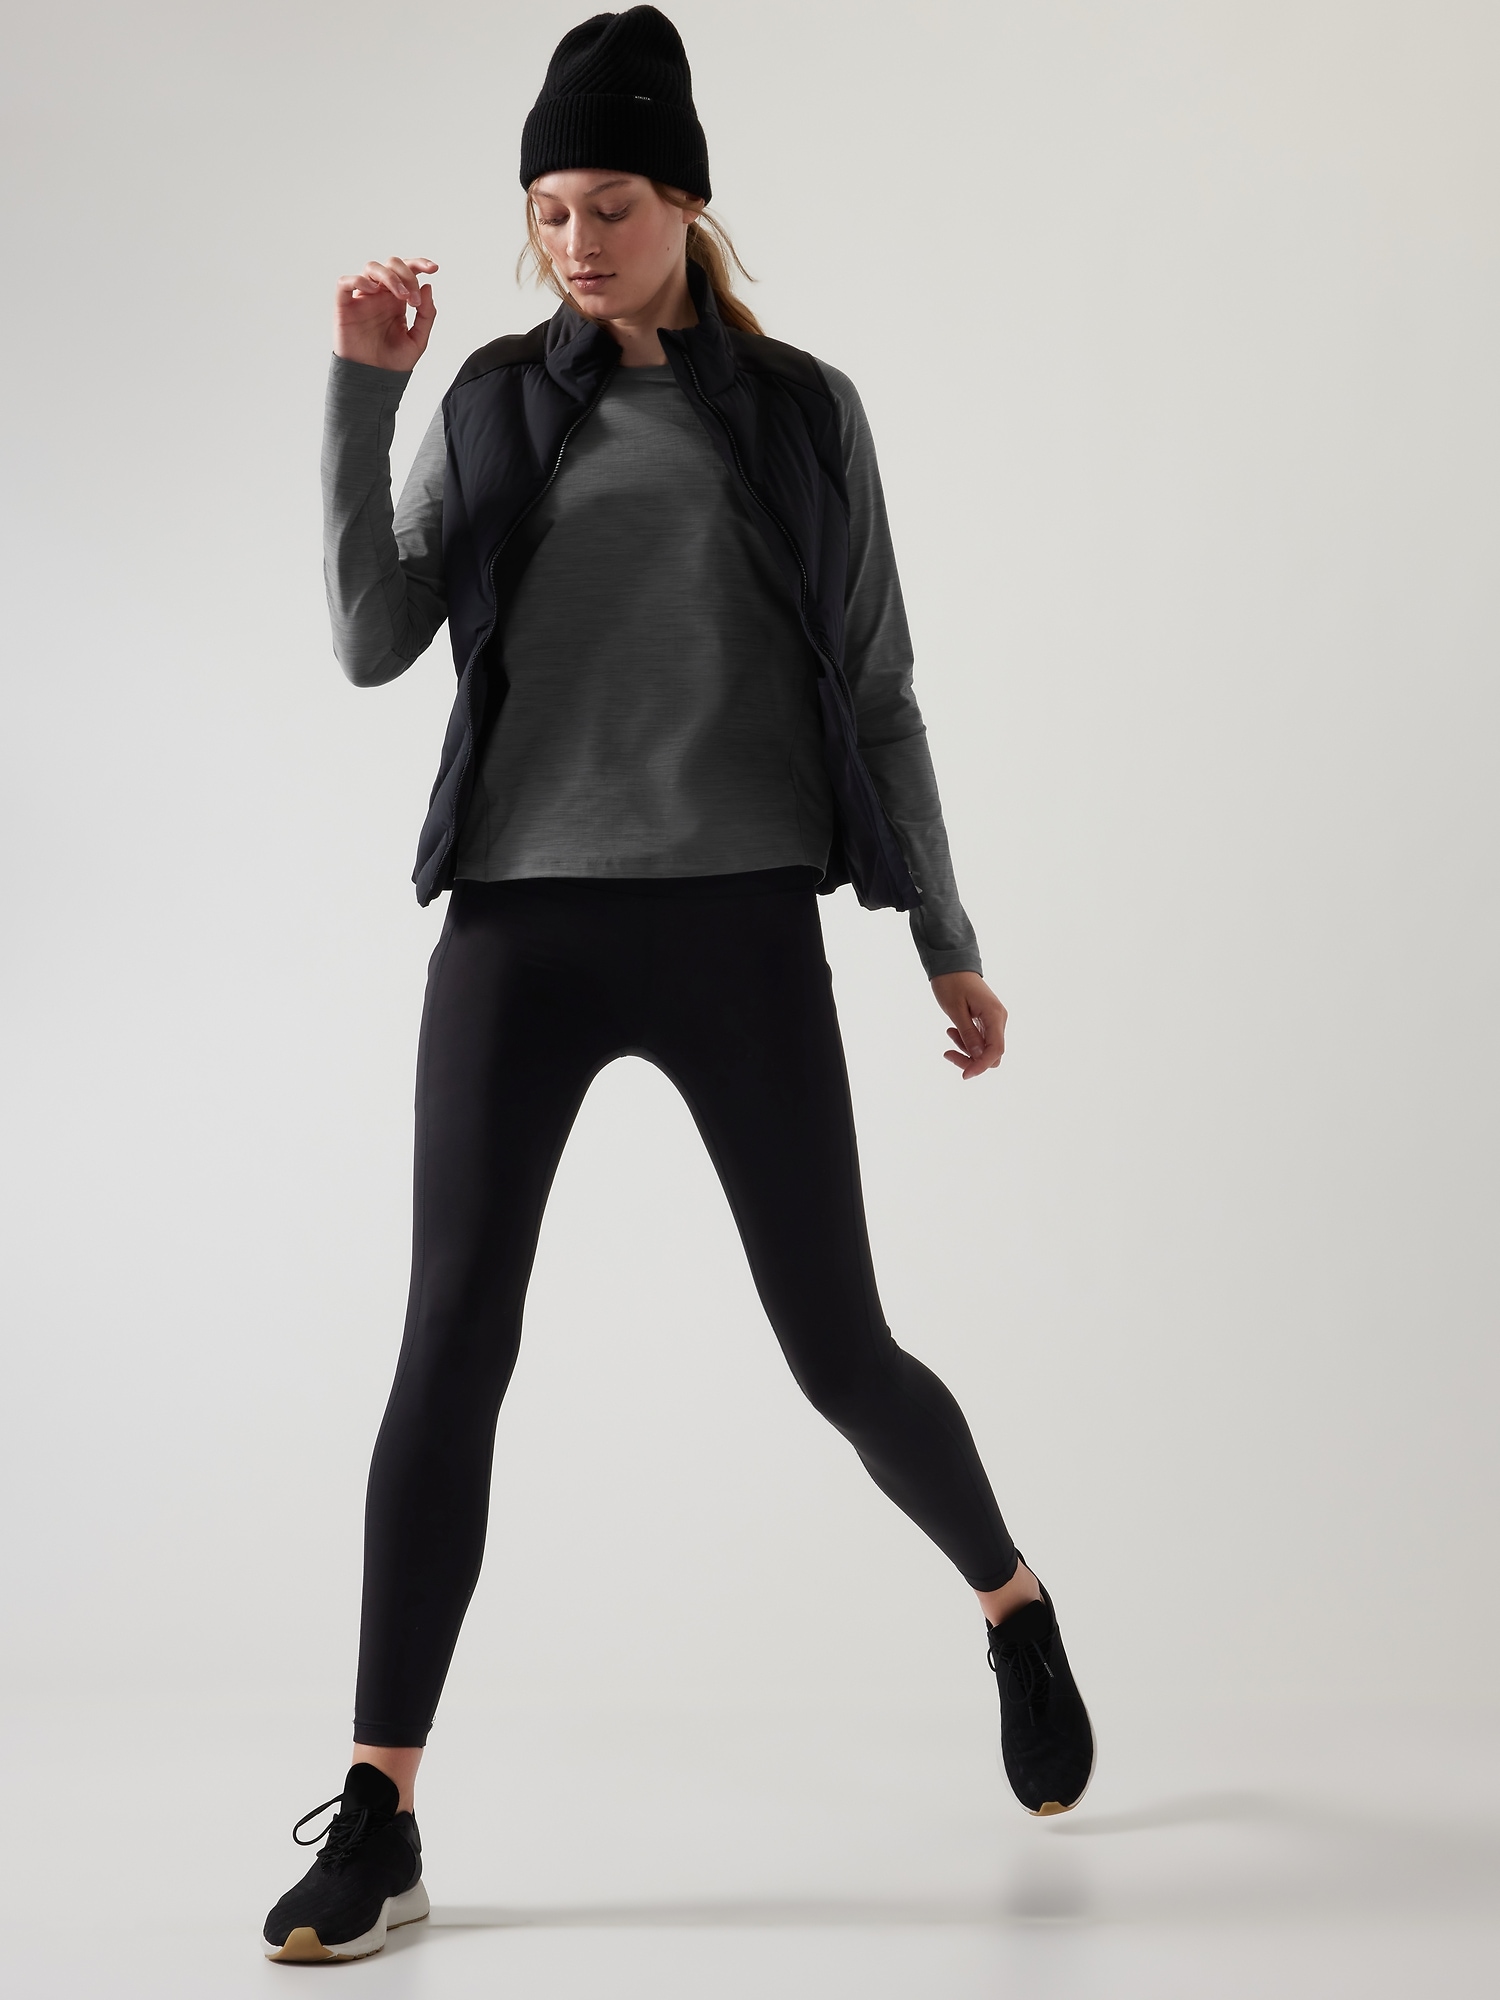 ATHLETA: LAUNCHES HIGH-PERFORMANCE TRAIN COLLECTION - Somerset Collection